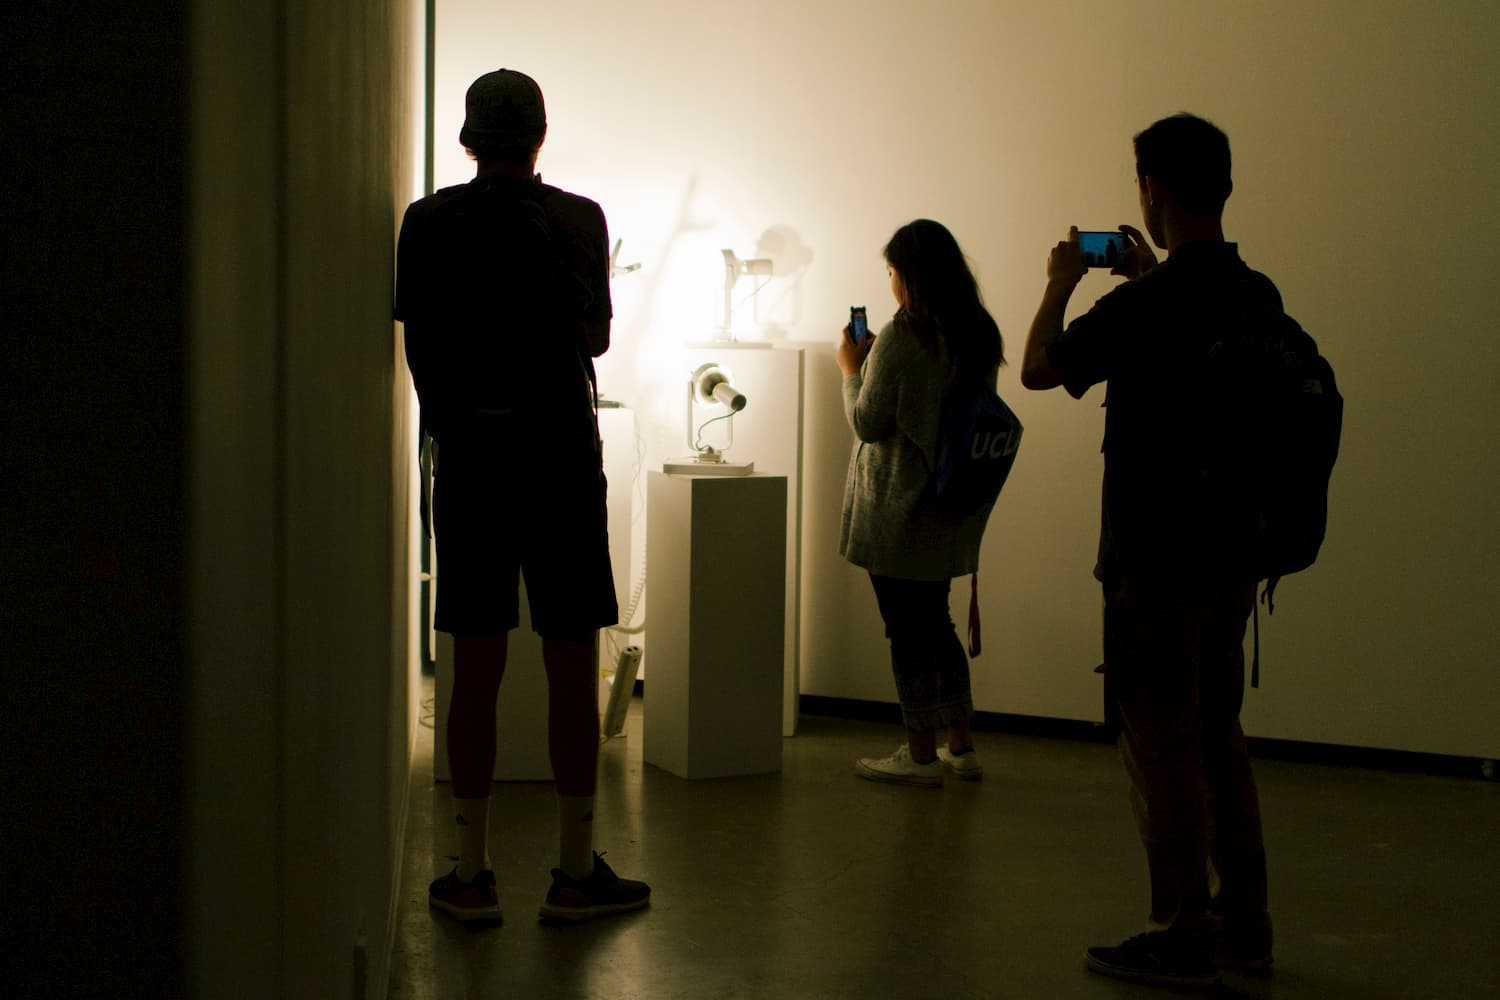 Series of lamps aimed toward a wall during YOUJIN CHUNG's solo show.